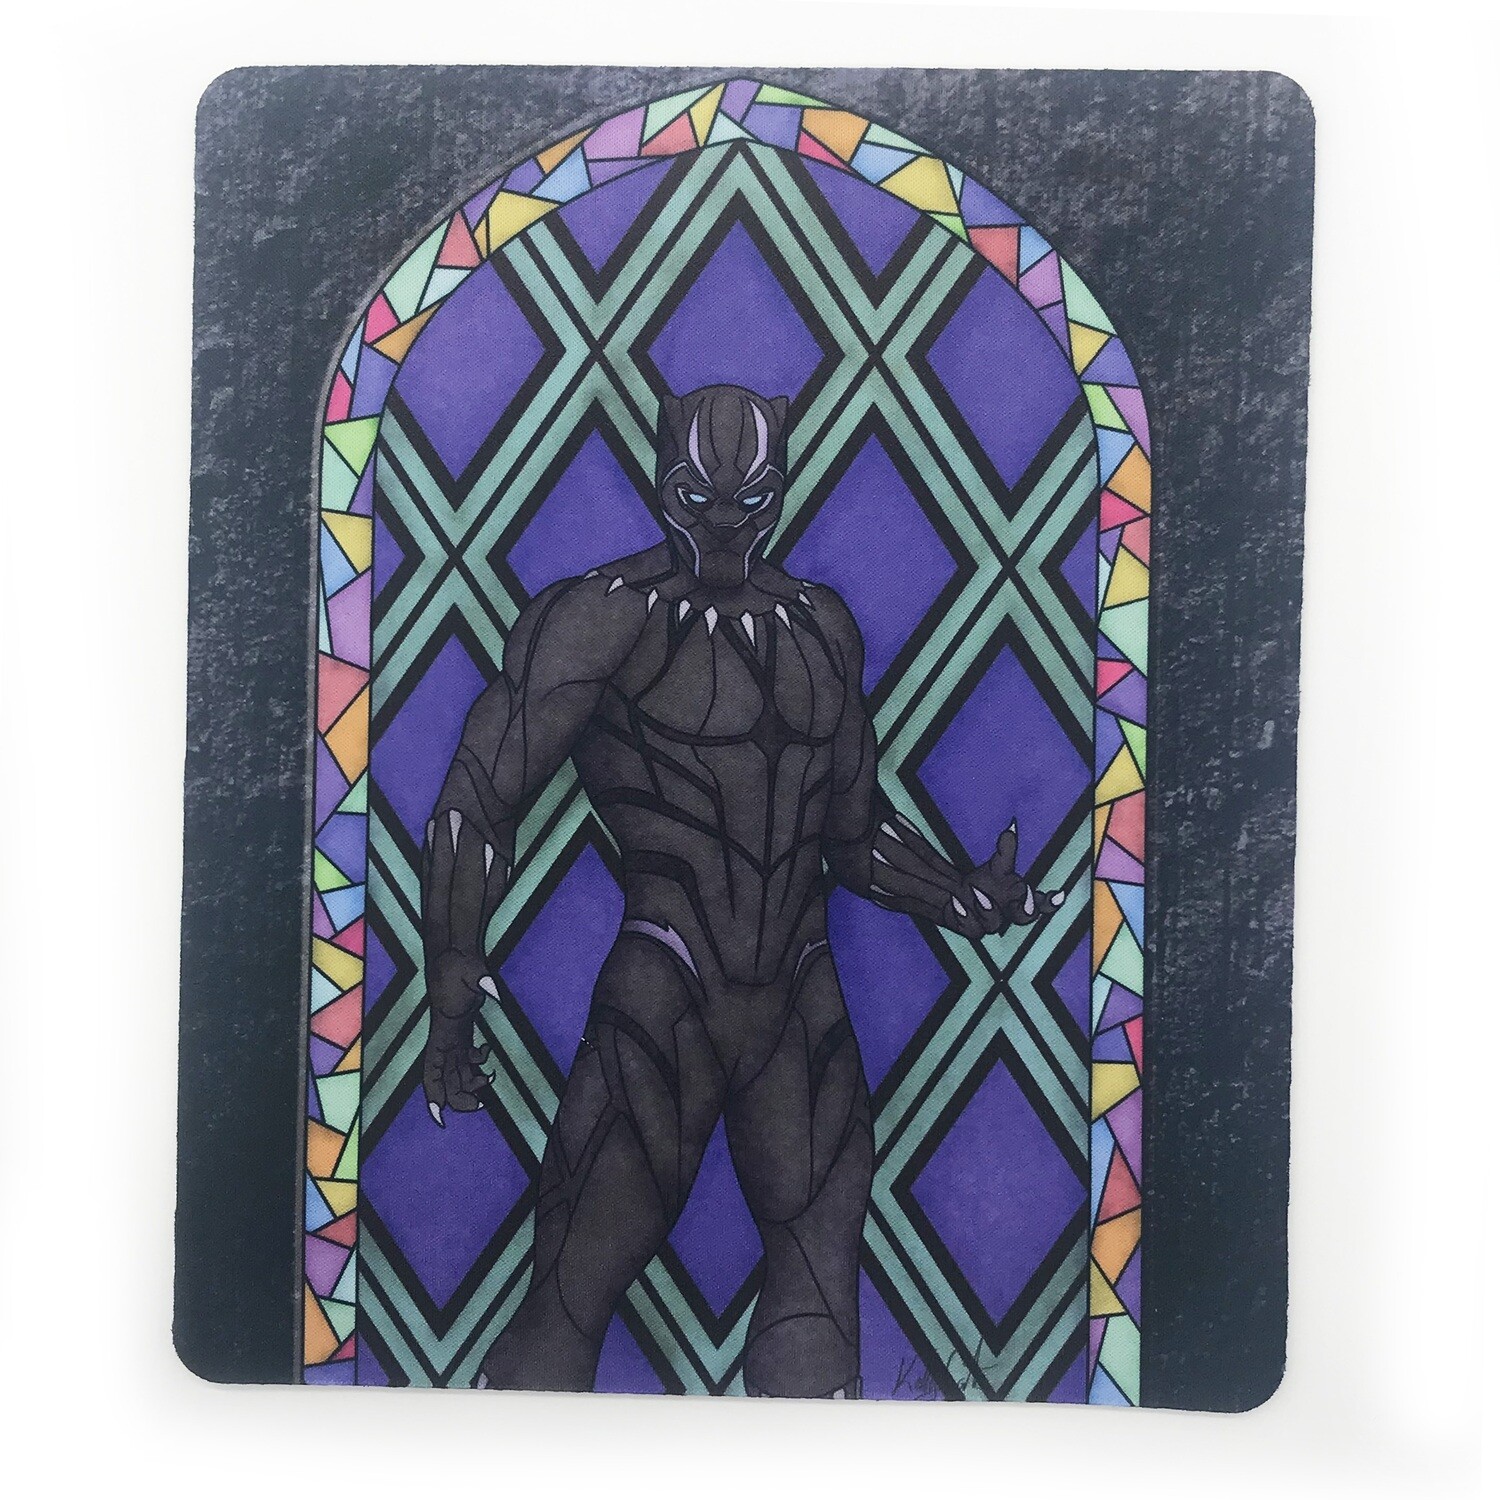 Mousepad/Game Mat - Stained Glass Tchalla